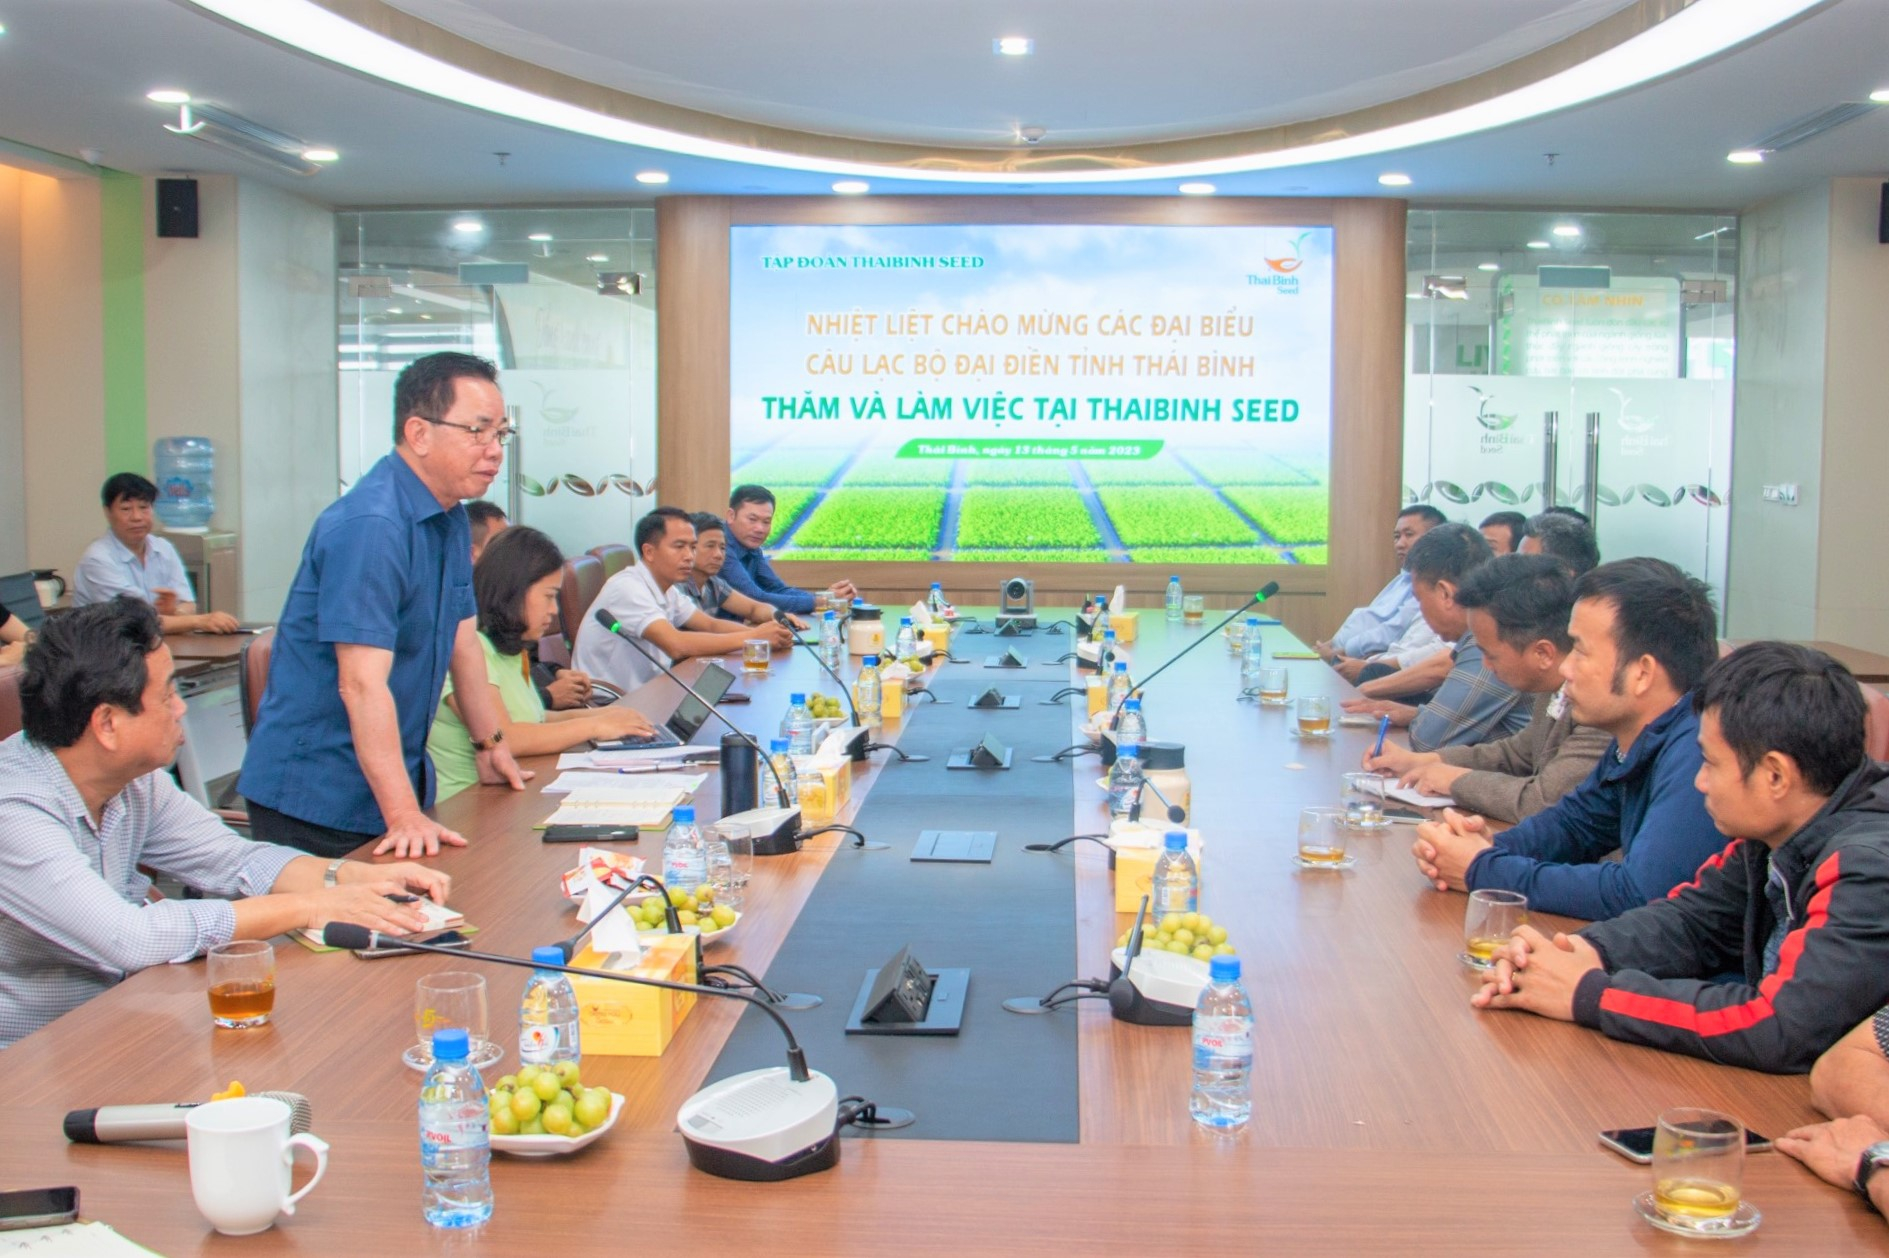 Thai Binh Dai Dien Club in a meeting with ThaiBinh Seed discussed the direction of cooperation and development of production links. Photo: TL.